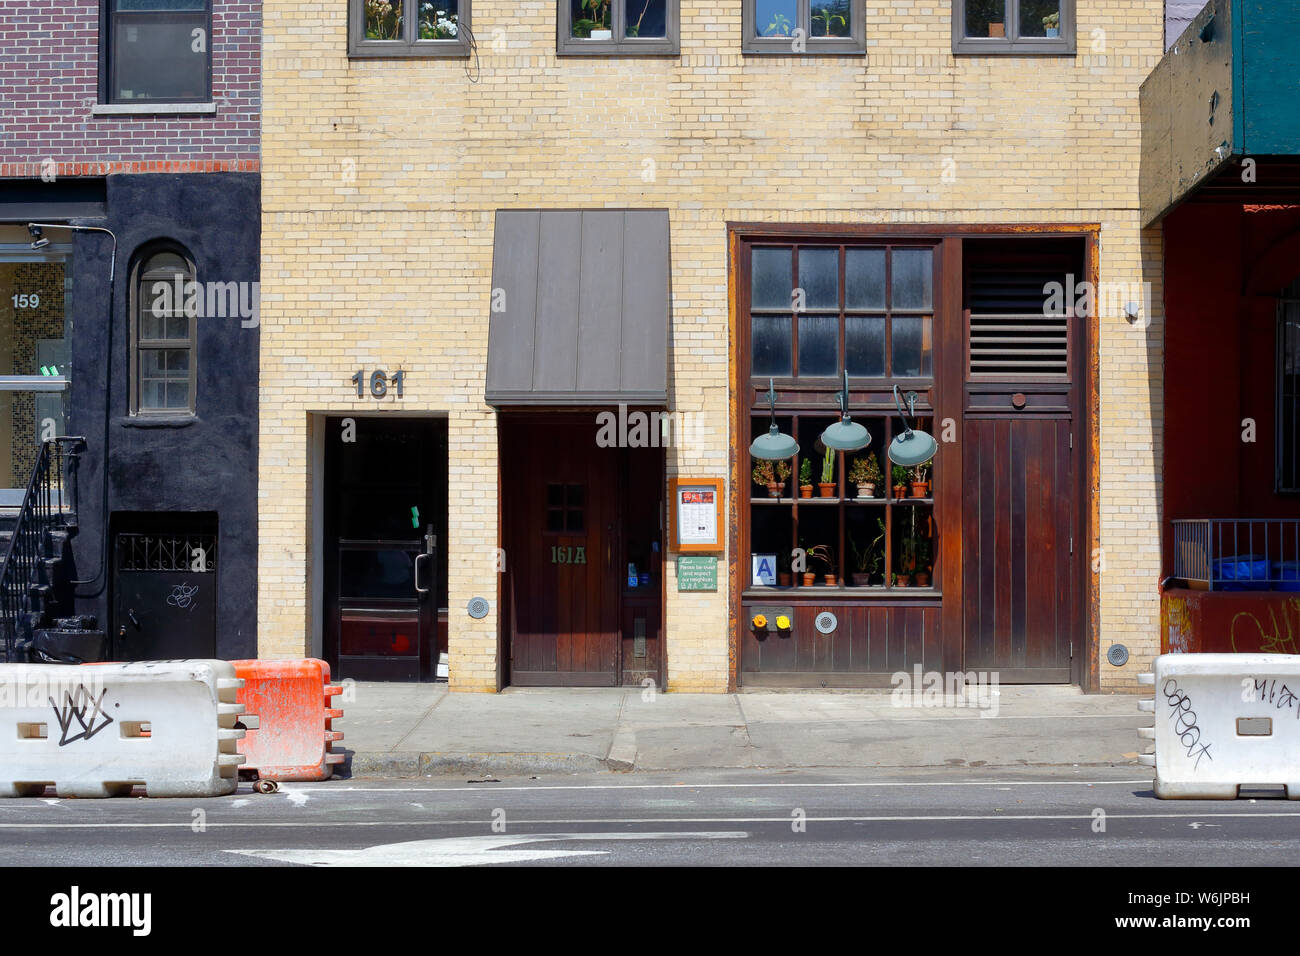 Dixon Place, 161A Chrystie St, New York, NY. exterior storefront of a performance space in the Lower East Side neighborhood of Manhattan. Stock Photo